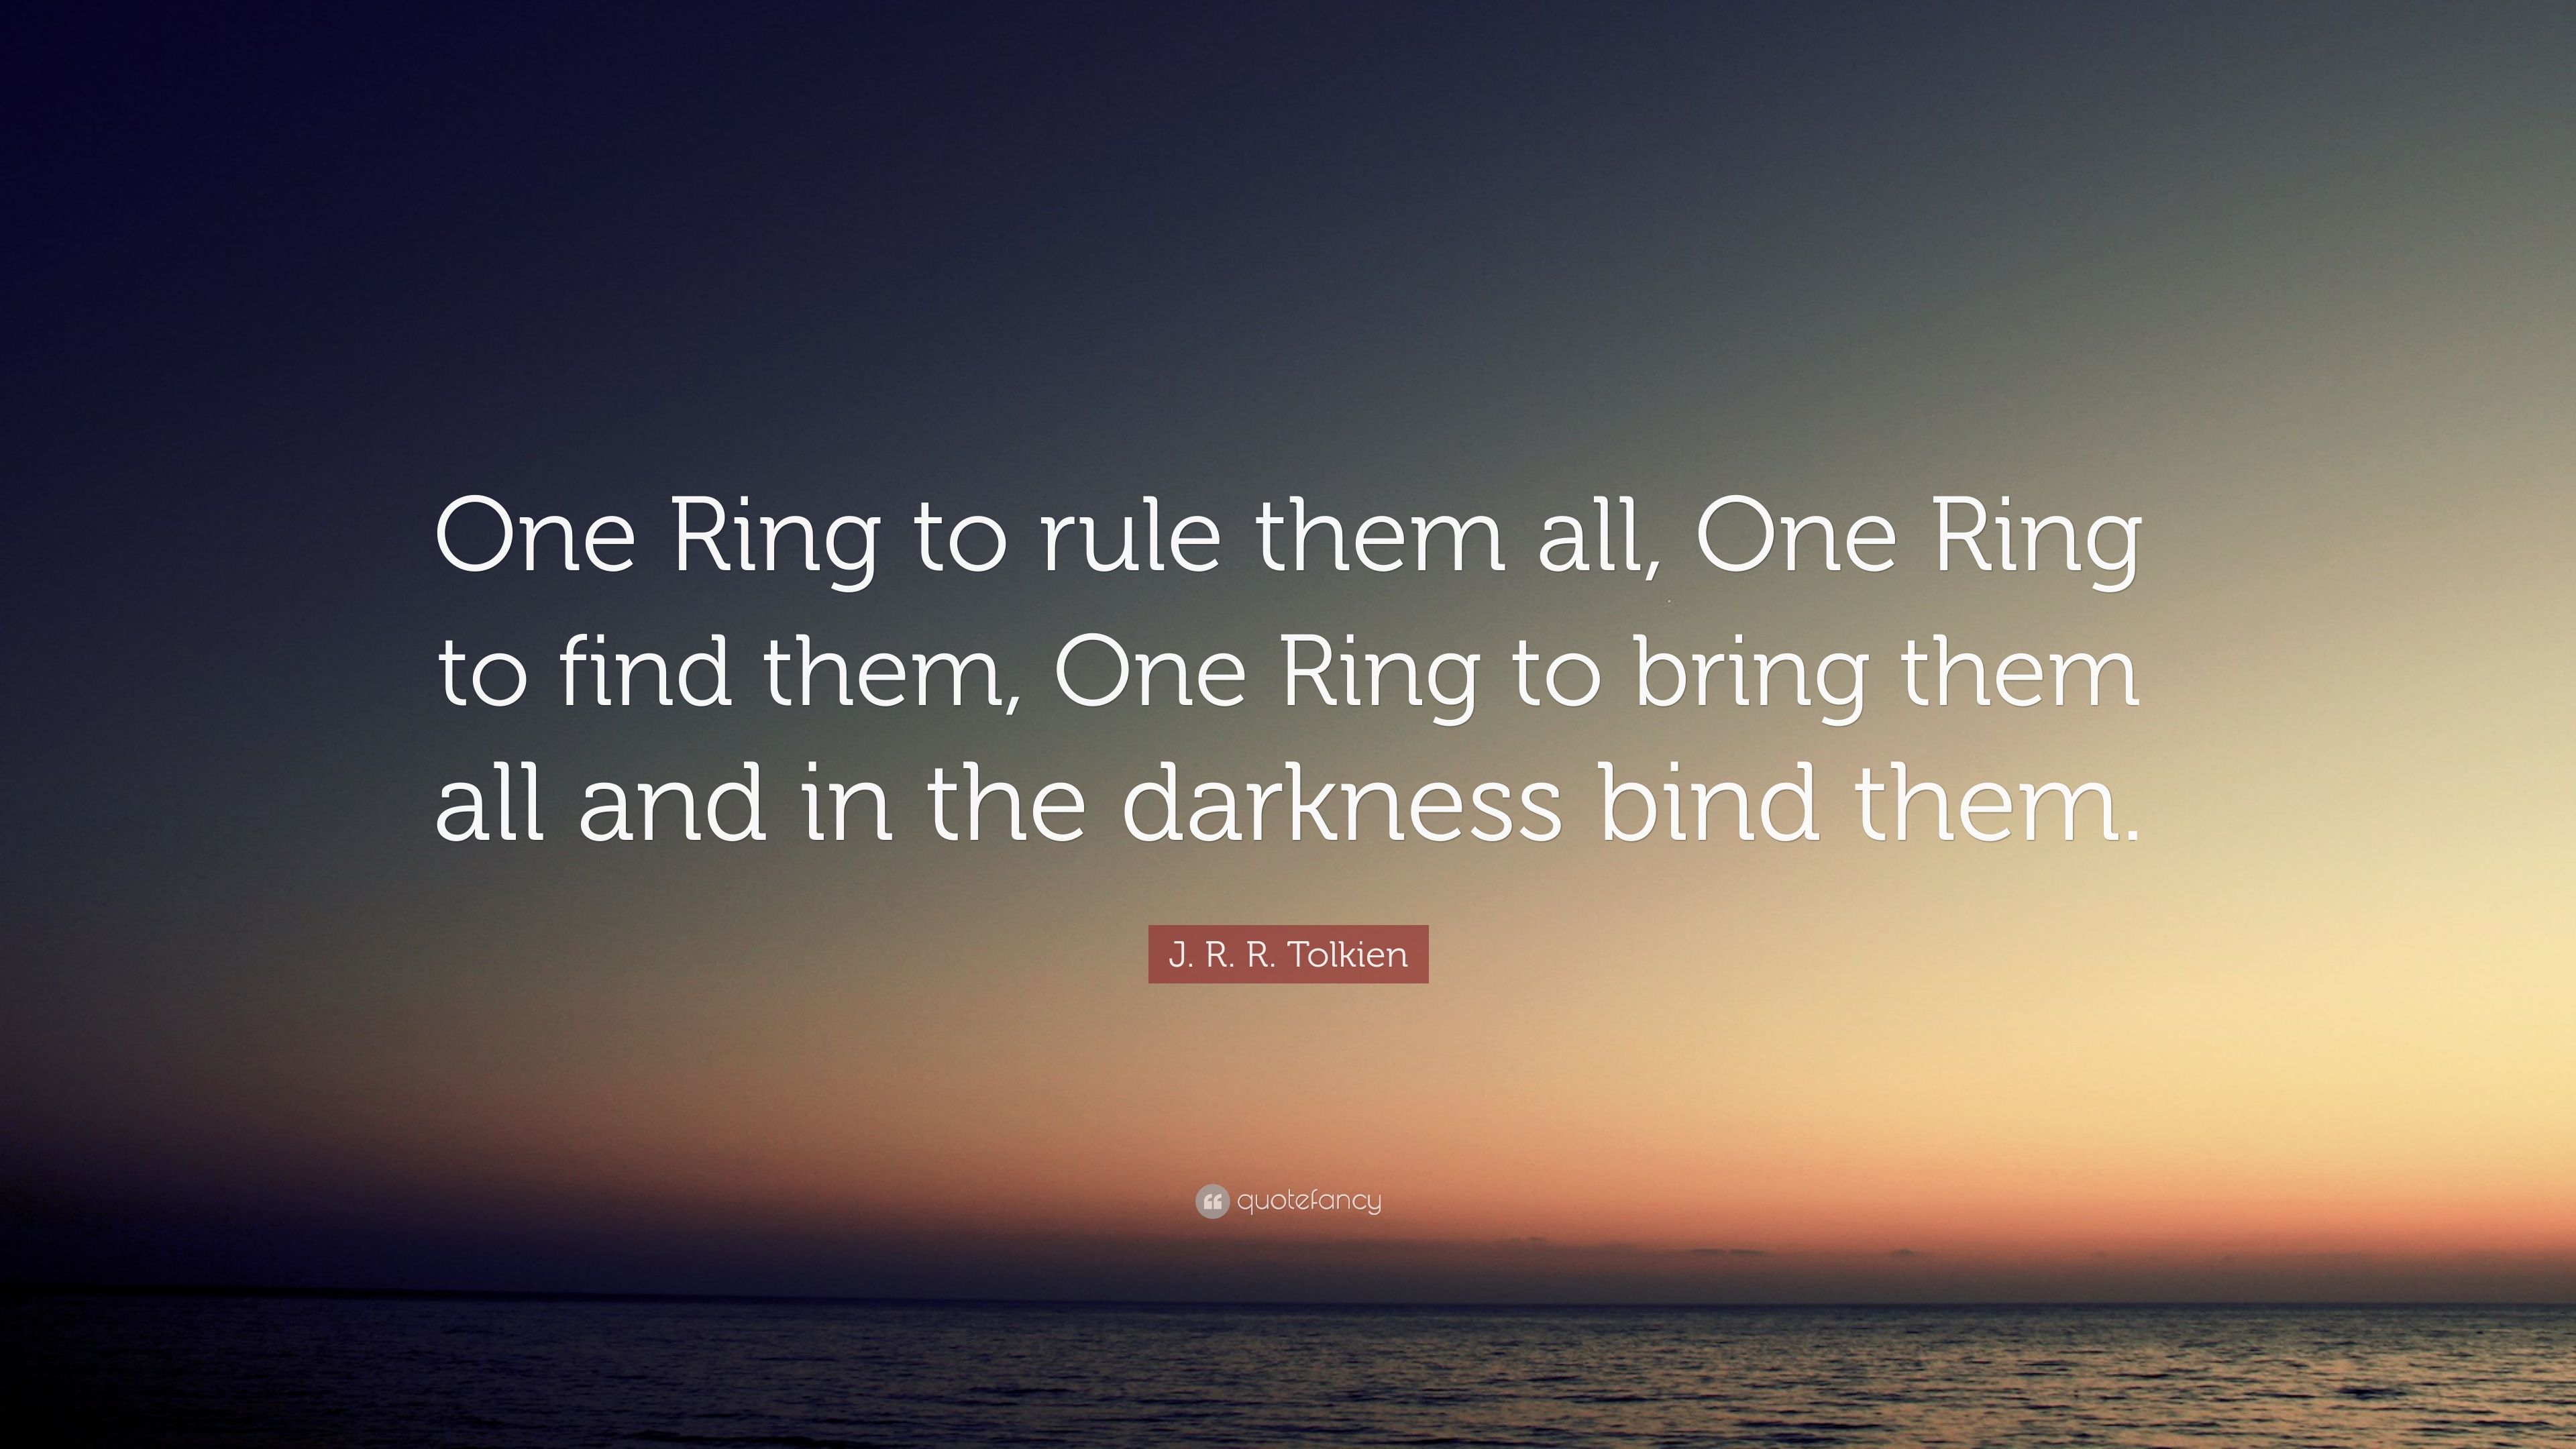 J. R. R. Tolkien Quote: “One Ring to rule them all, One Ring to find them, One Ring to bring them all and in the darkness bind them.” (12 wallpaper)